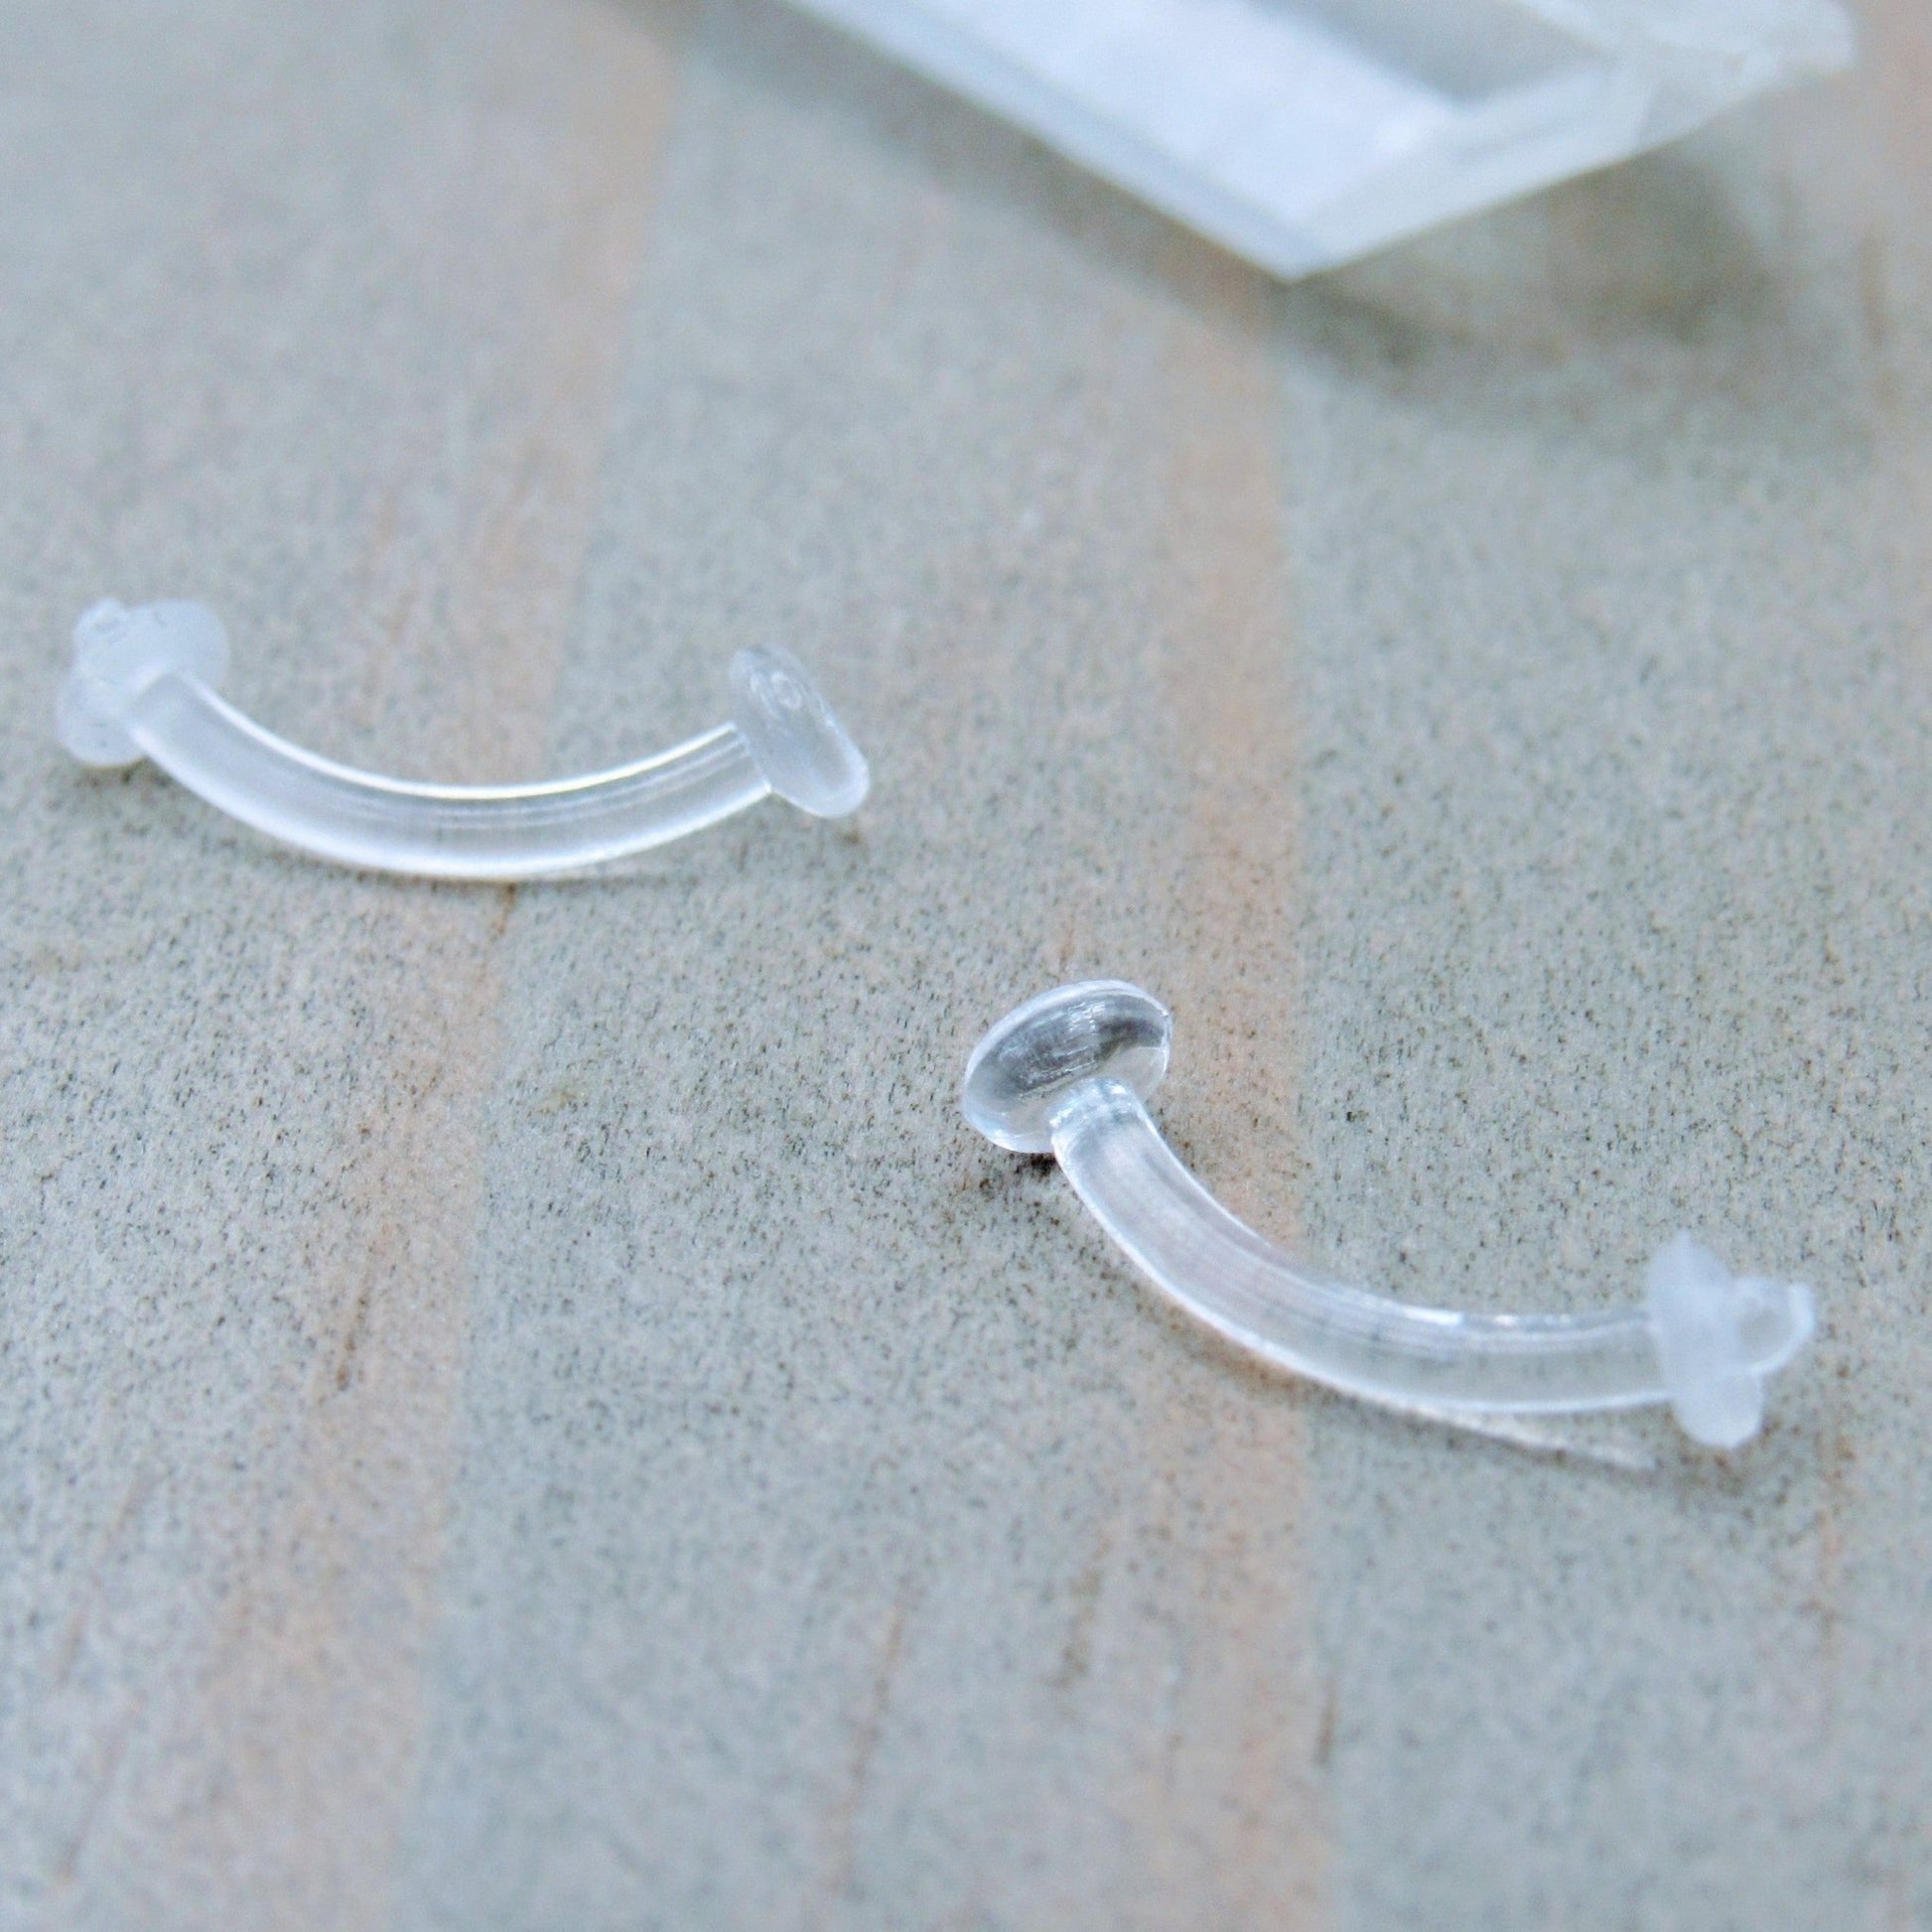 16g Clear curved barbell 5/16" (8mm) rook daith eyebrow vertical labret body jewelry earring - Siren Body Jewelry